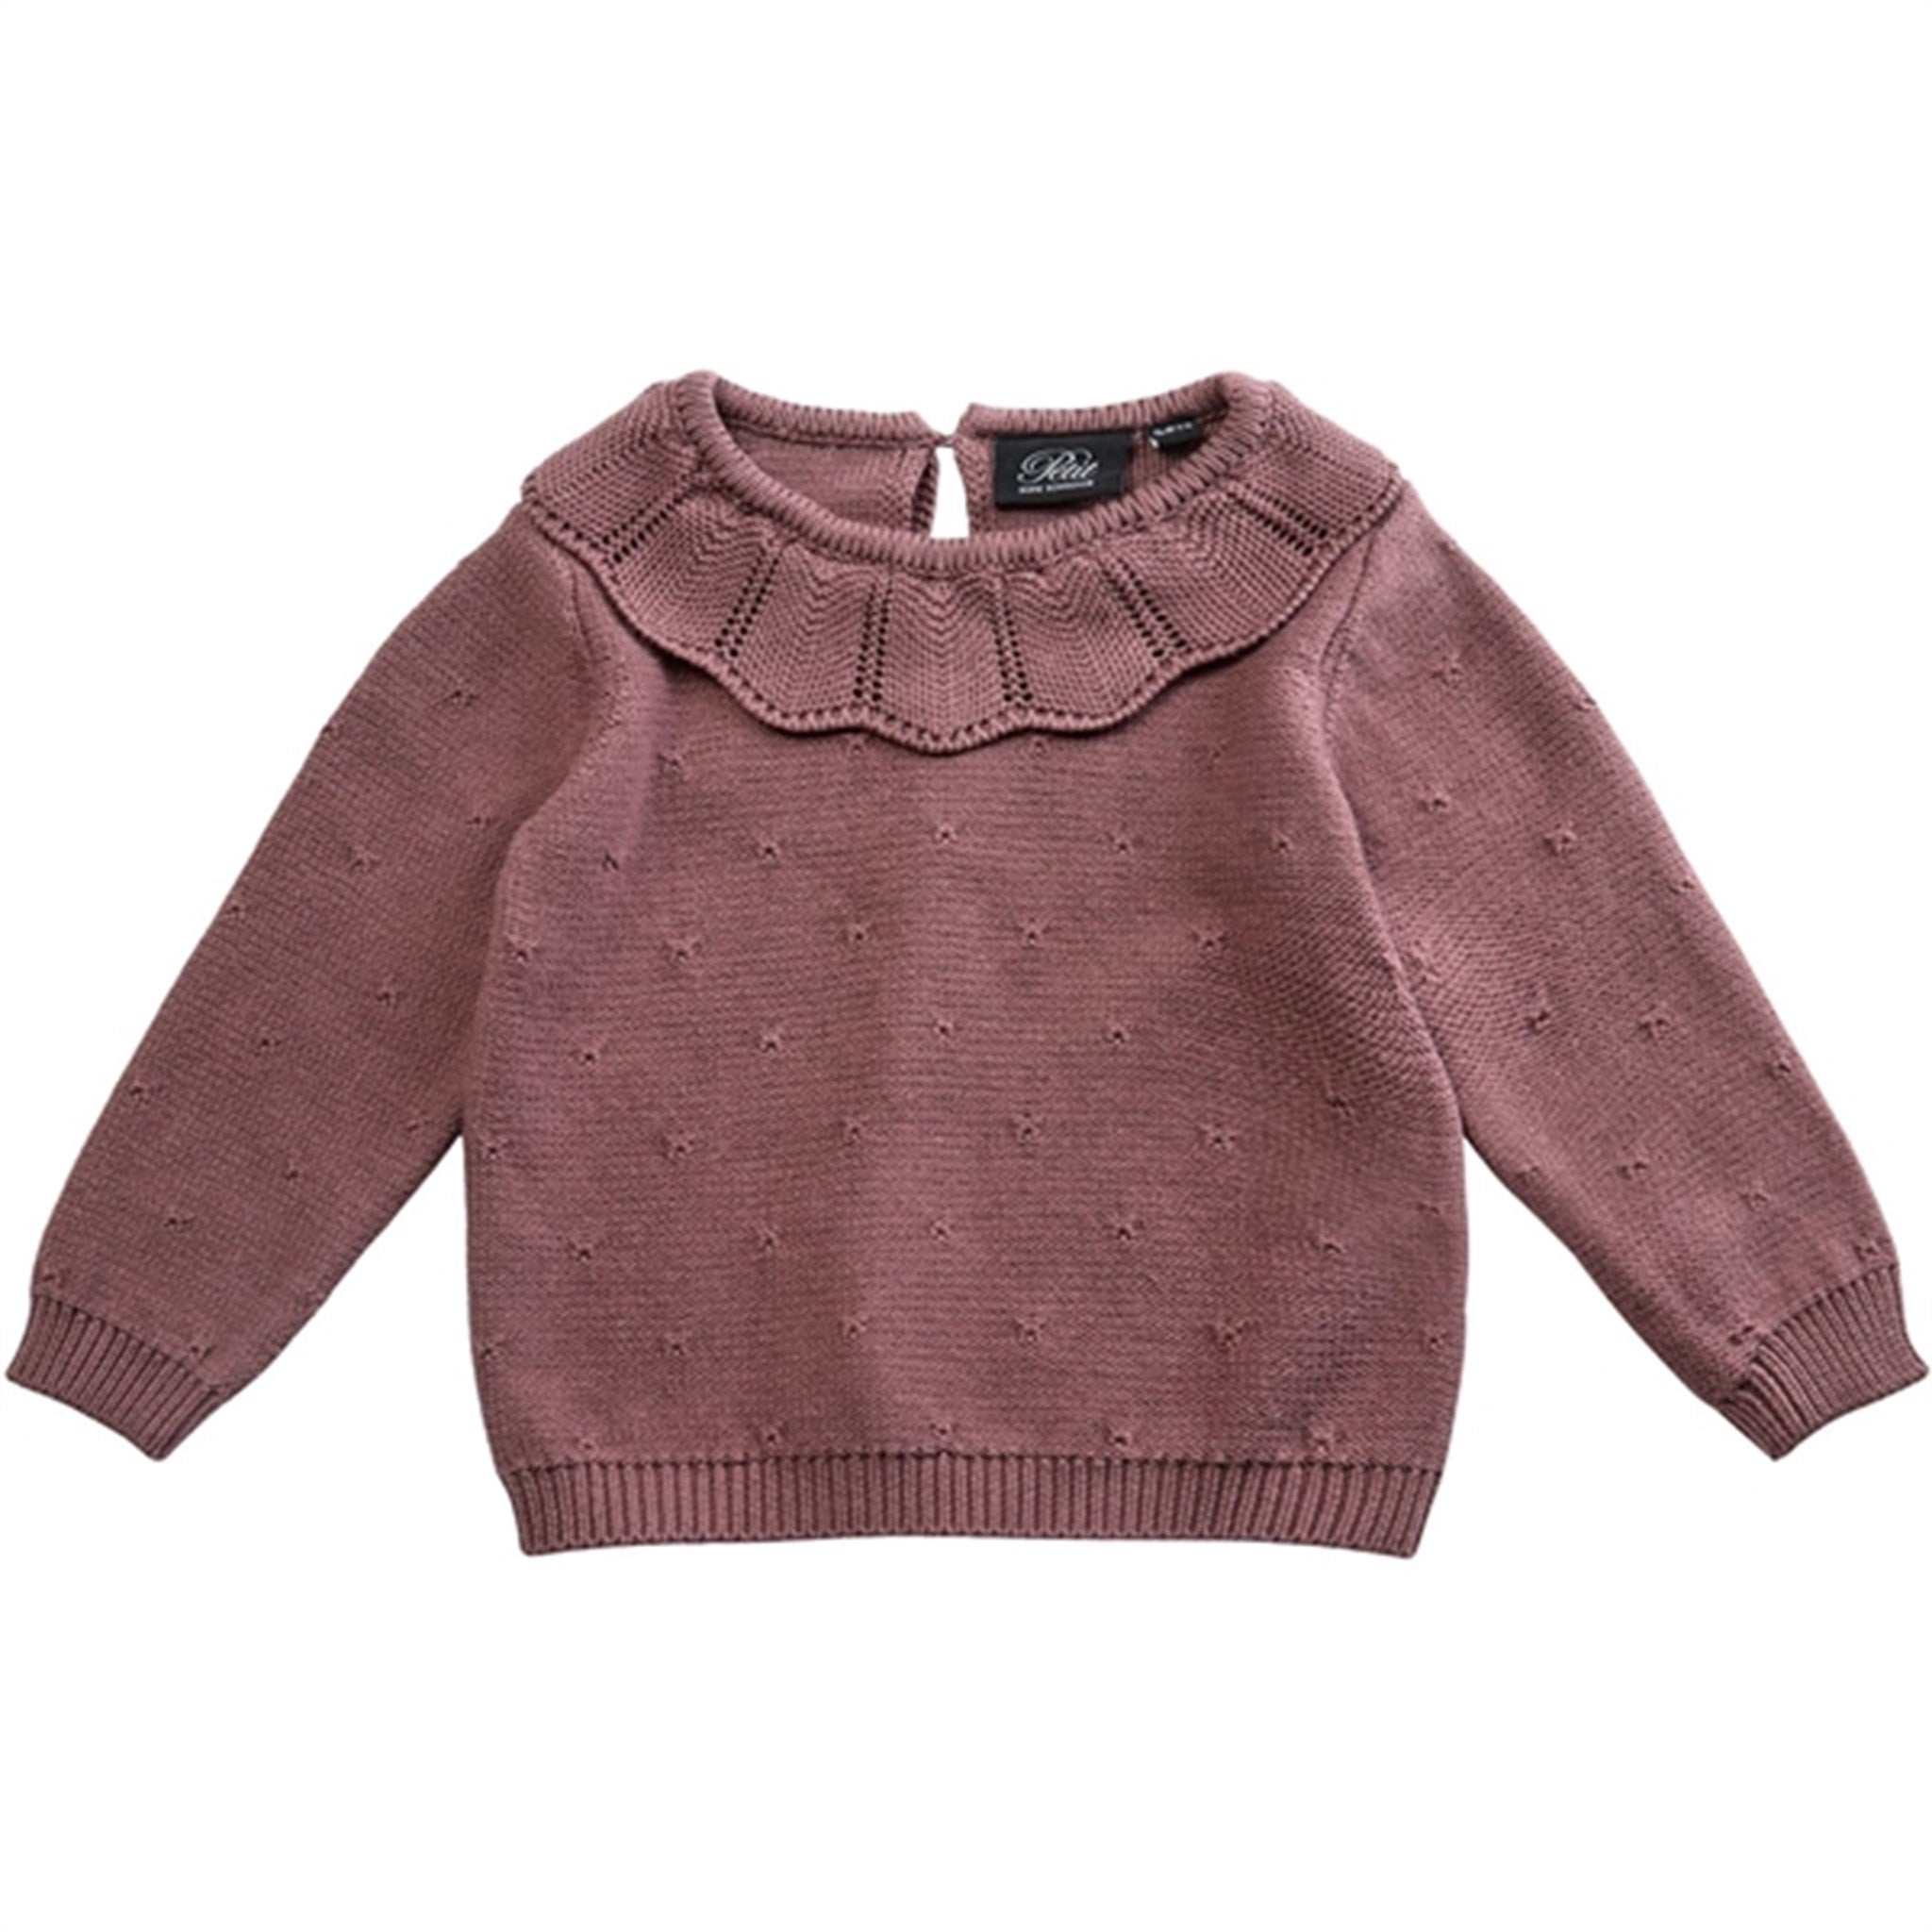 Sofie Schnoor Bright Lilac Knit 4